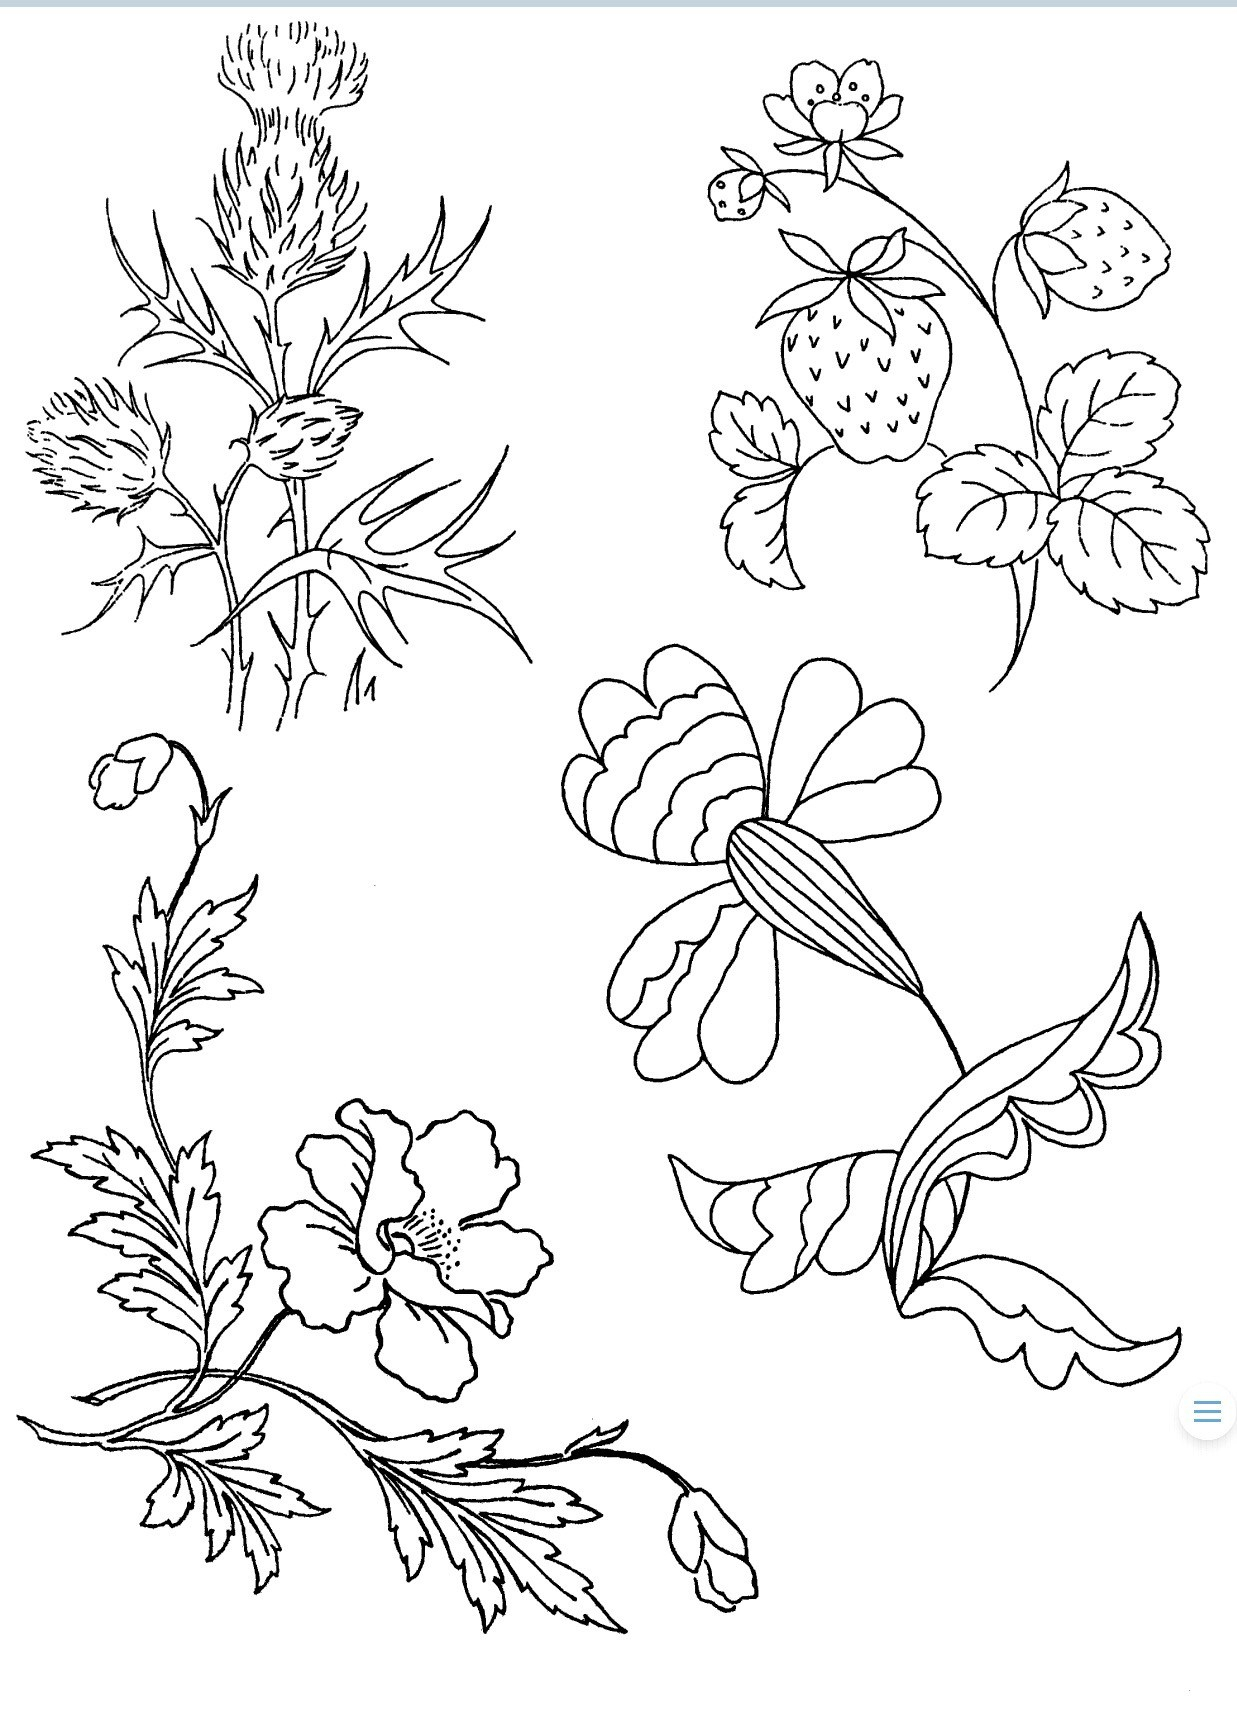 Free Crewel Embroidery Patterns Embroidery Patterns Free Pdf Lots Of Patterns